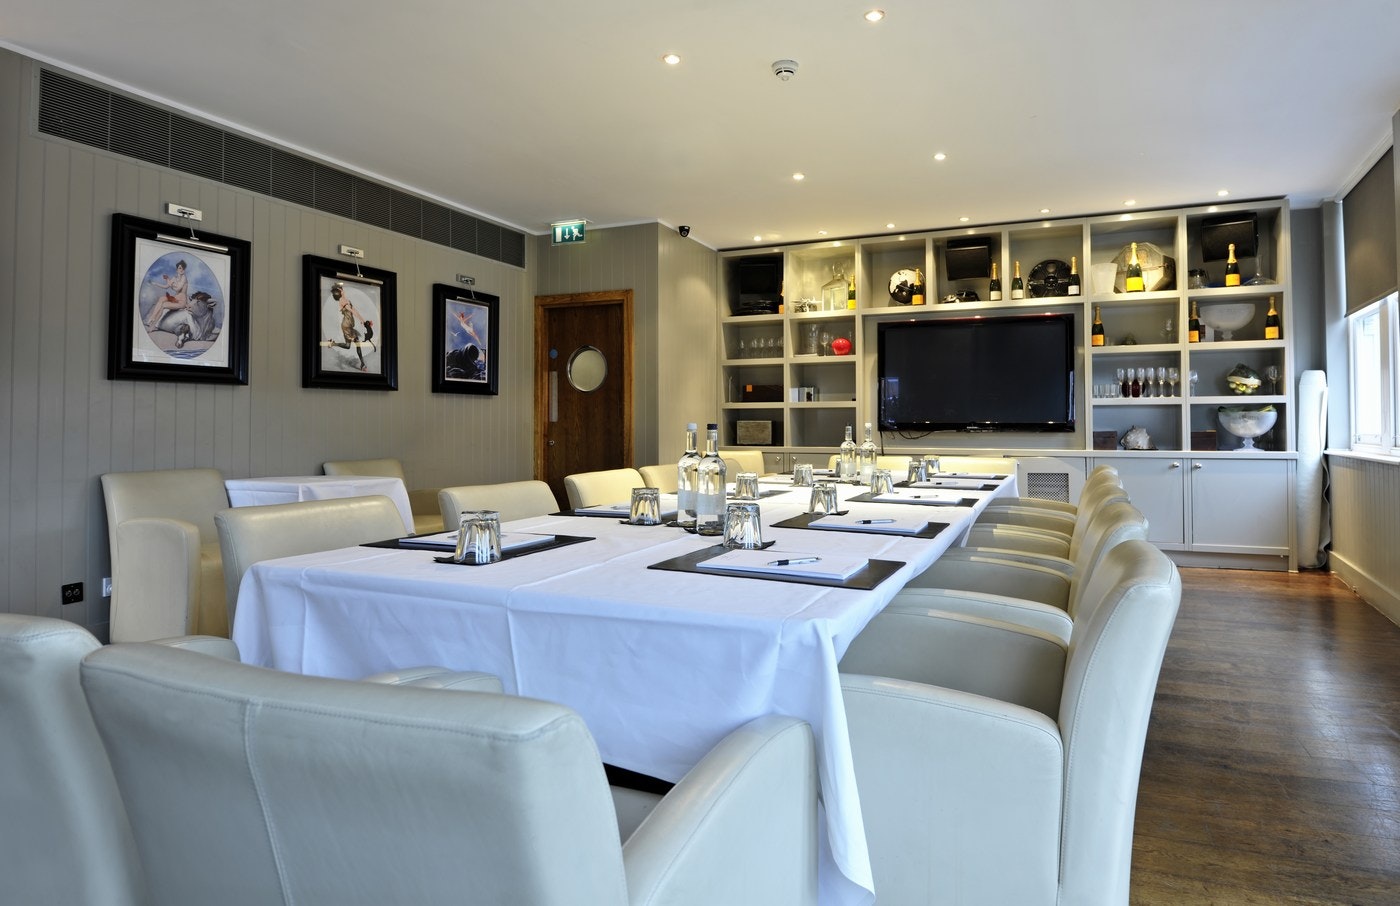 Albert's at Beaufort House - Private Dining Room image 8